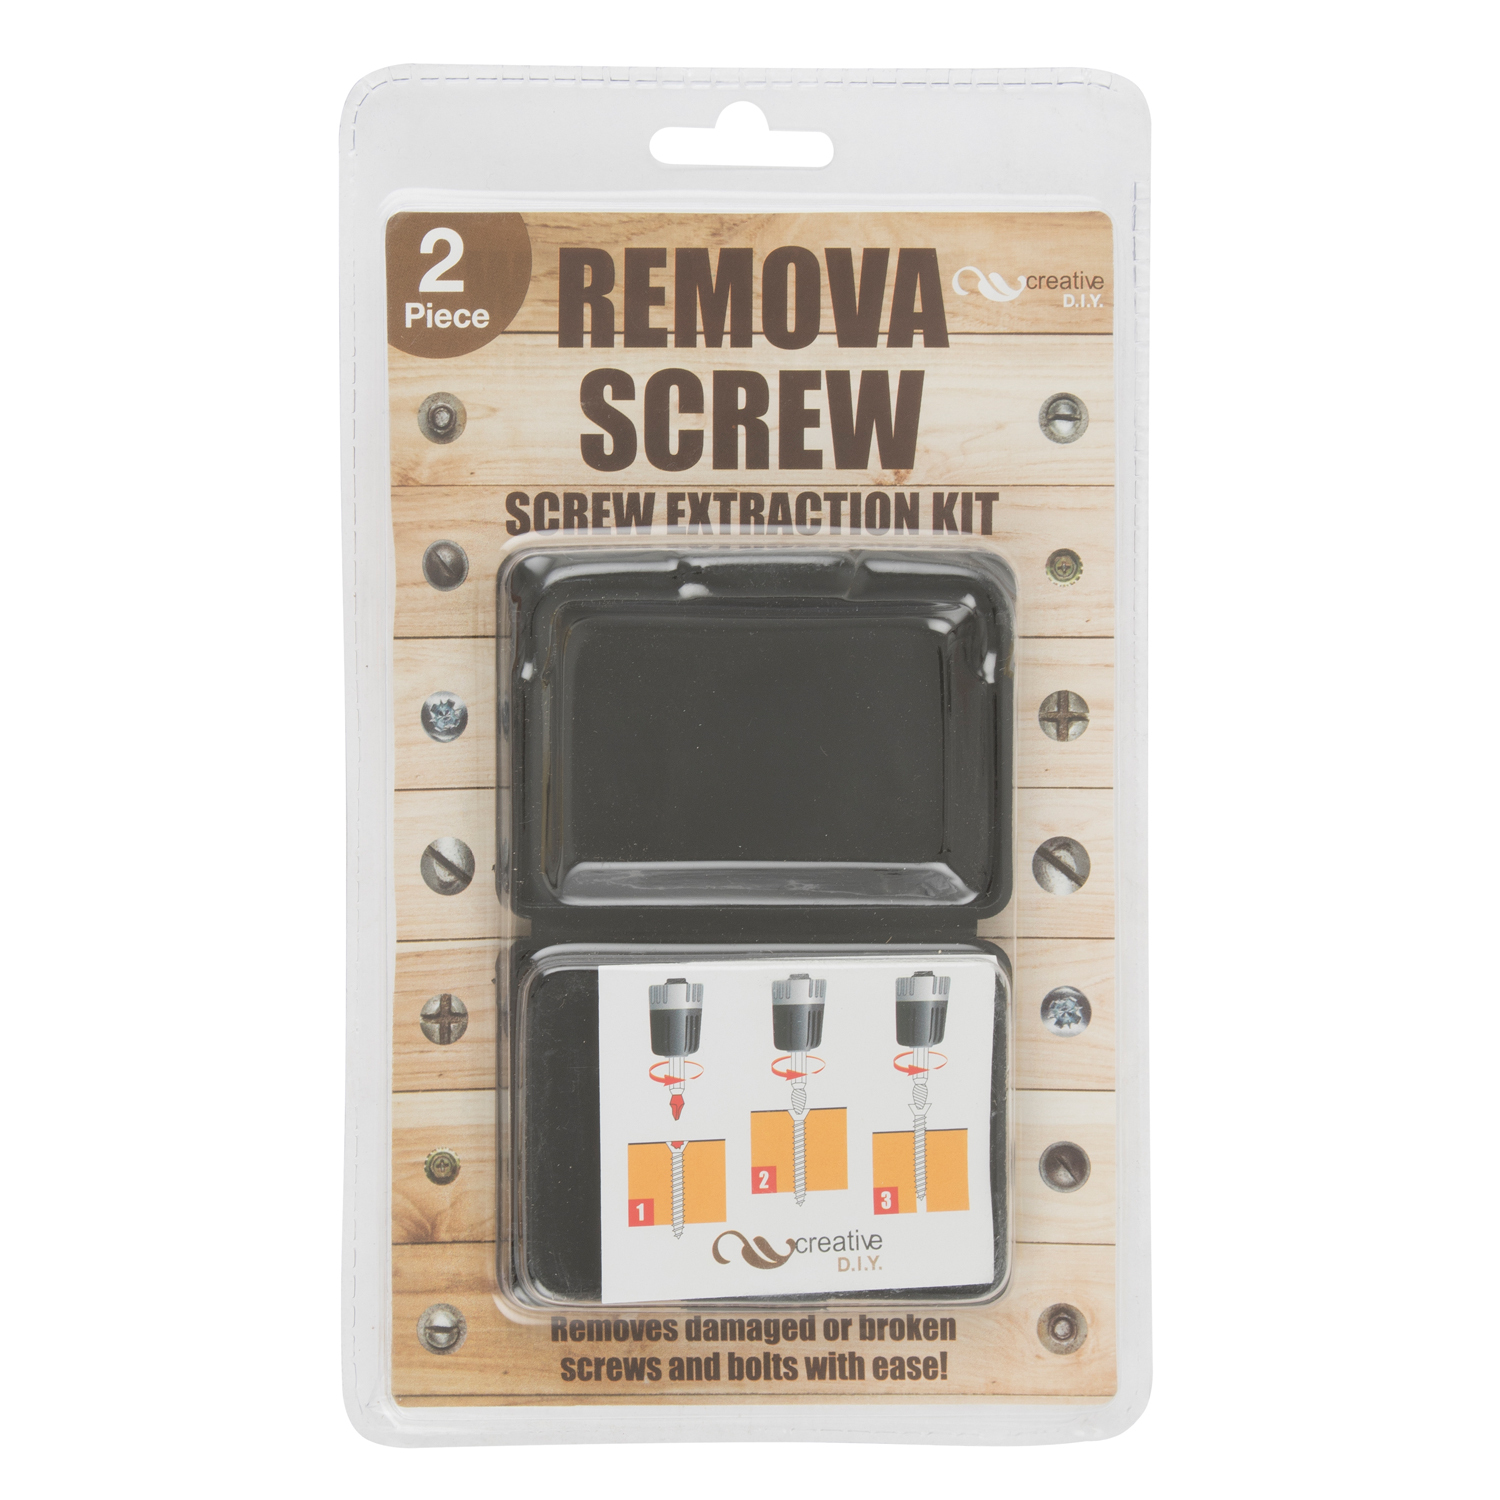 Creative Products 2 Piece Remova Screw Extraction Kit Image